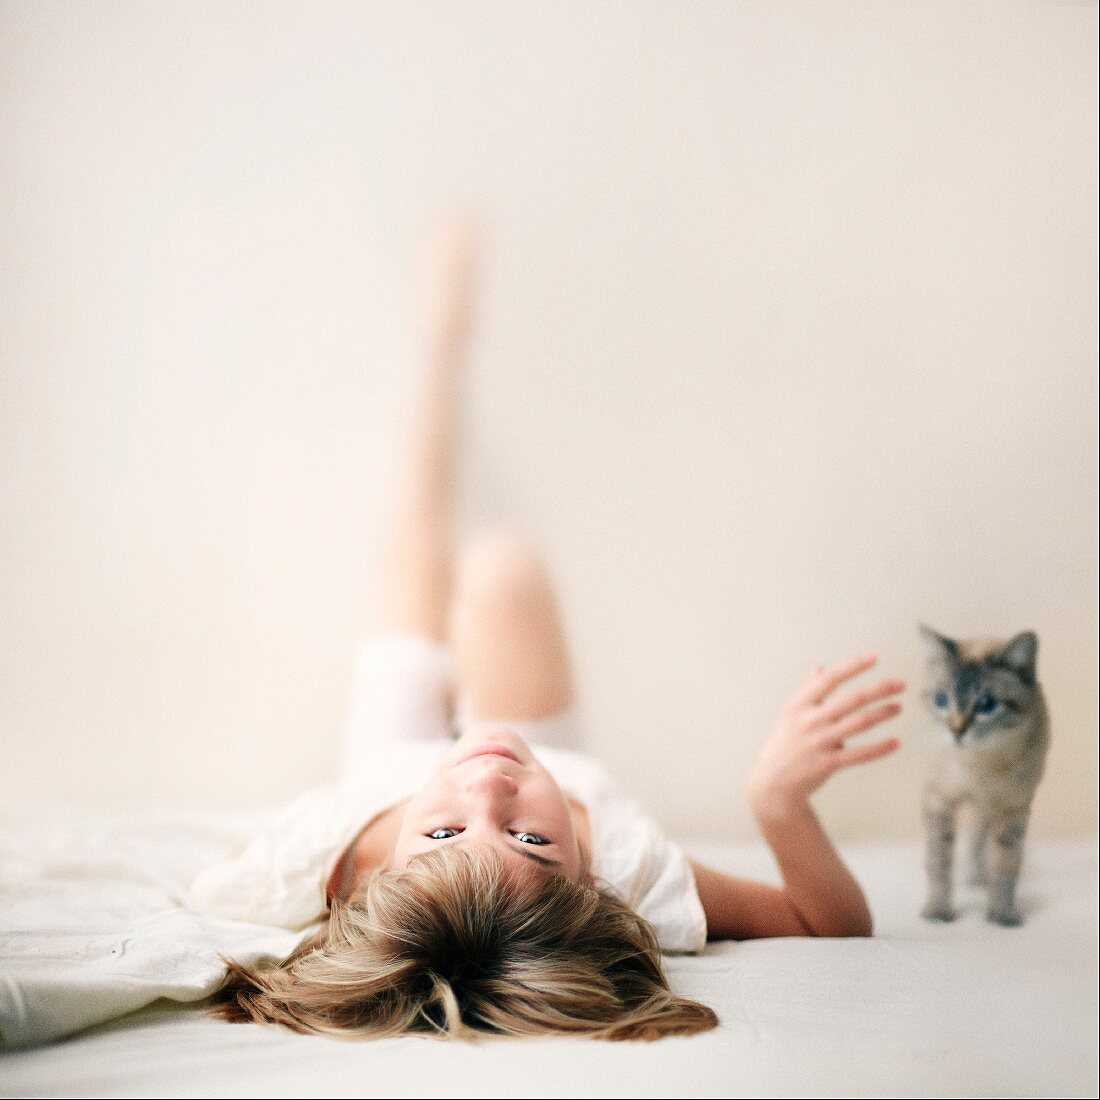 A young girl lying a the floor stroking a cat